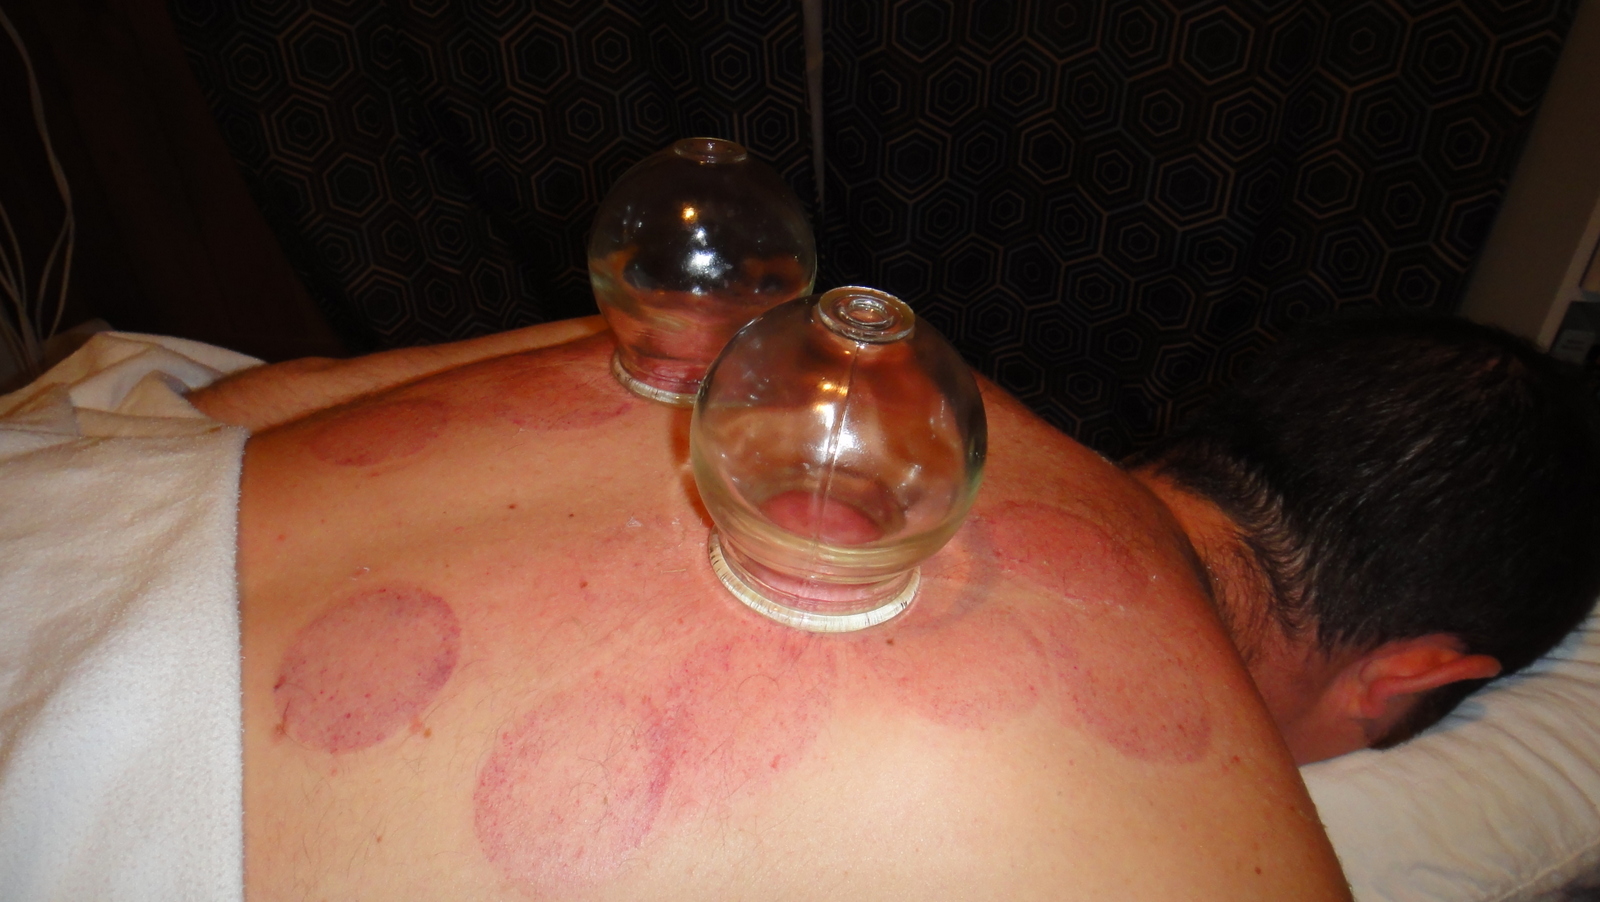 cupping back 1